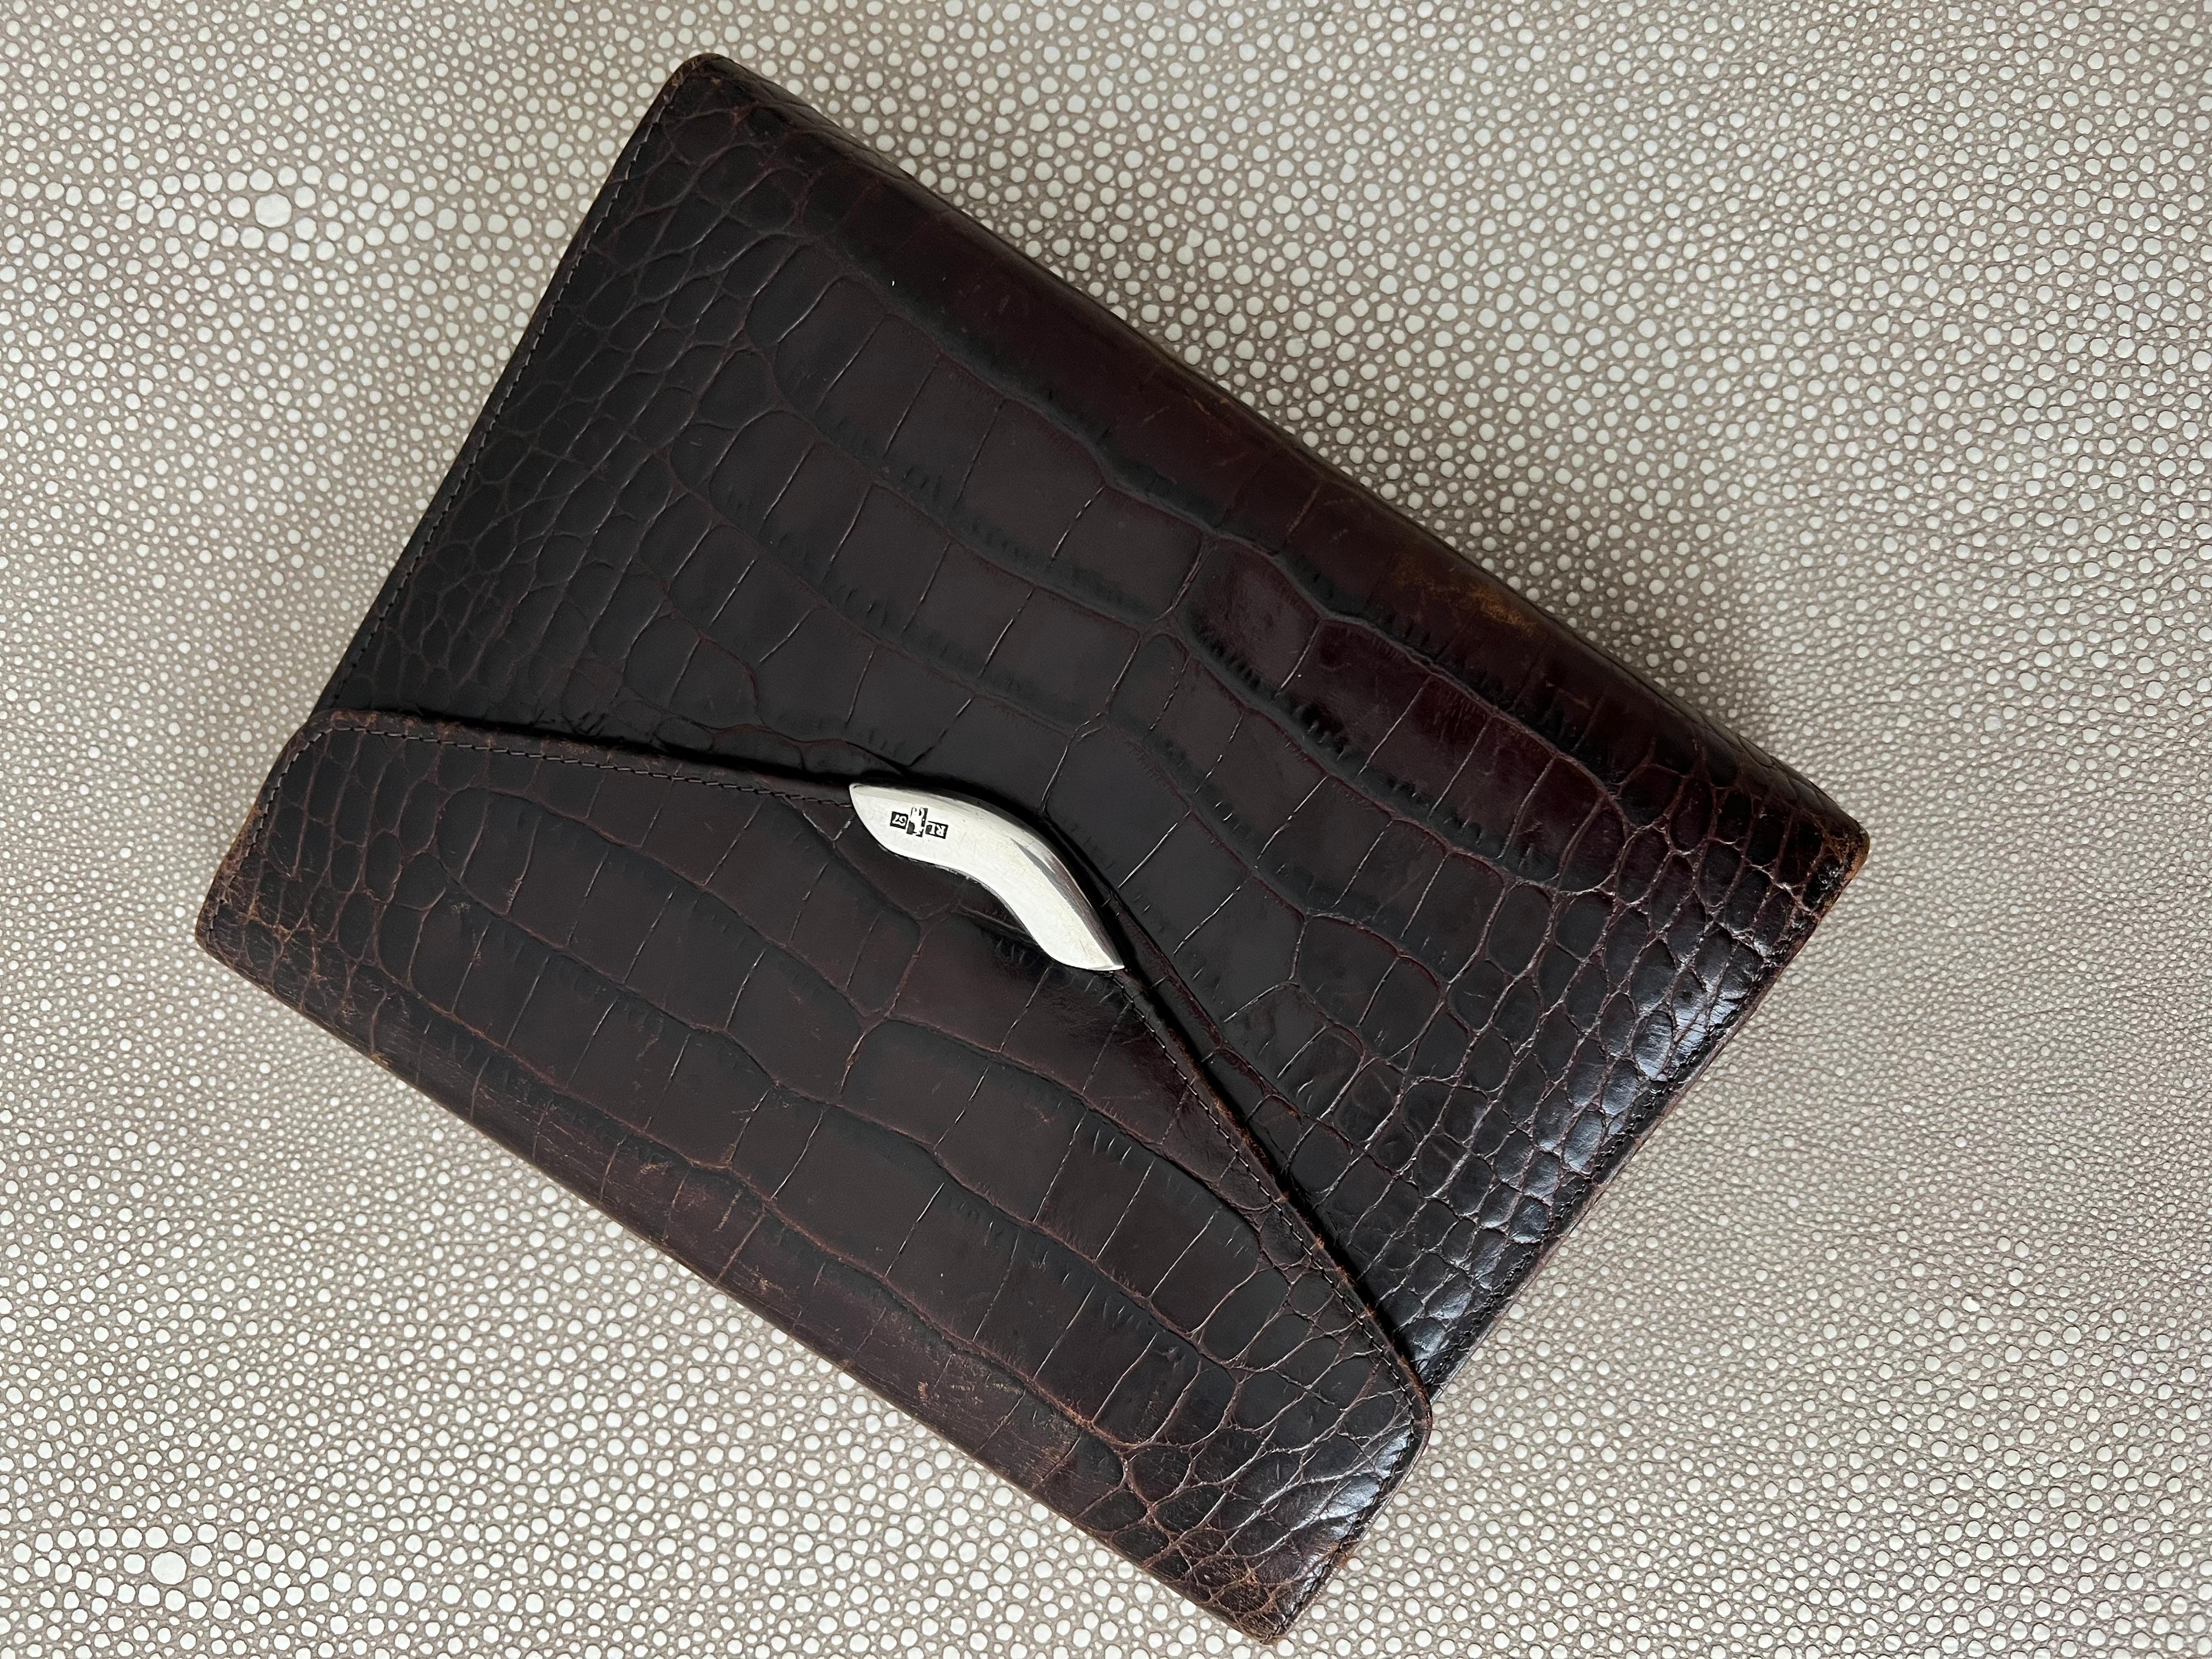 A wonderful Day planner cover.  
The original Stamped crocodile leather is in great condition with rings inside, the ability to hold 5 credit cards, Identification and pockets for papers.

A handsome piece with impressive details